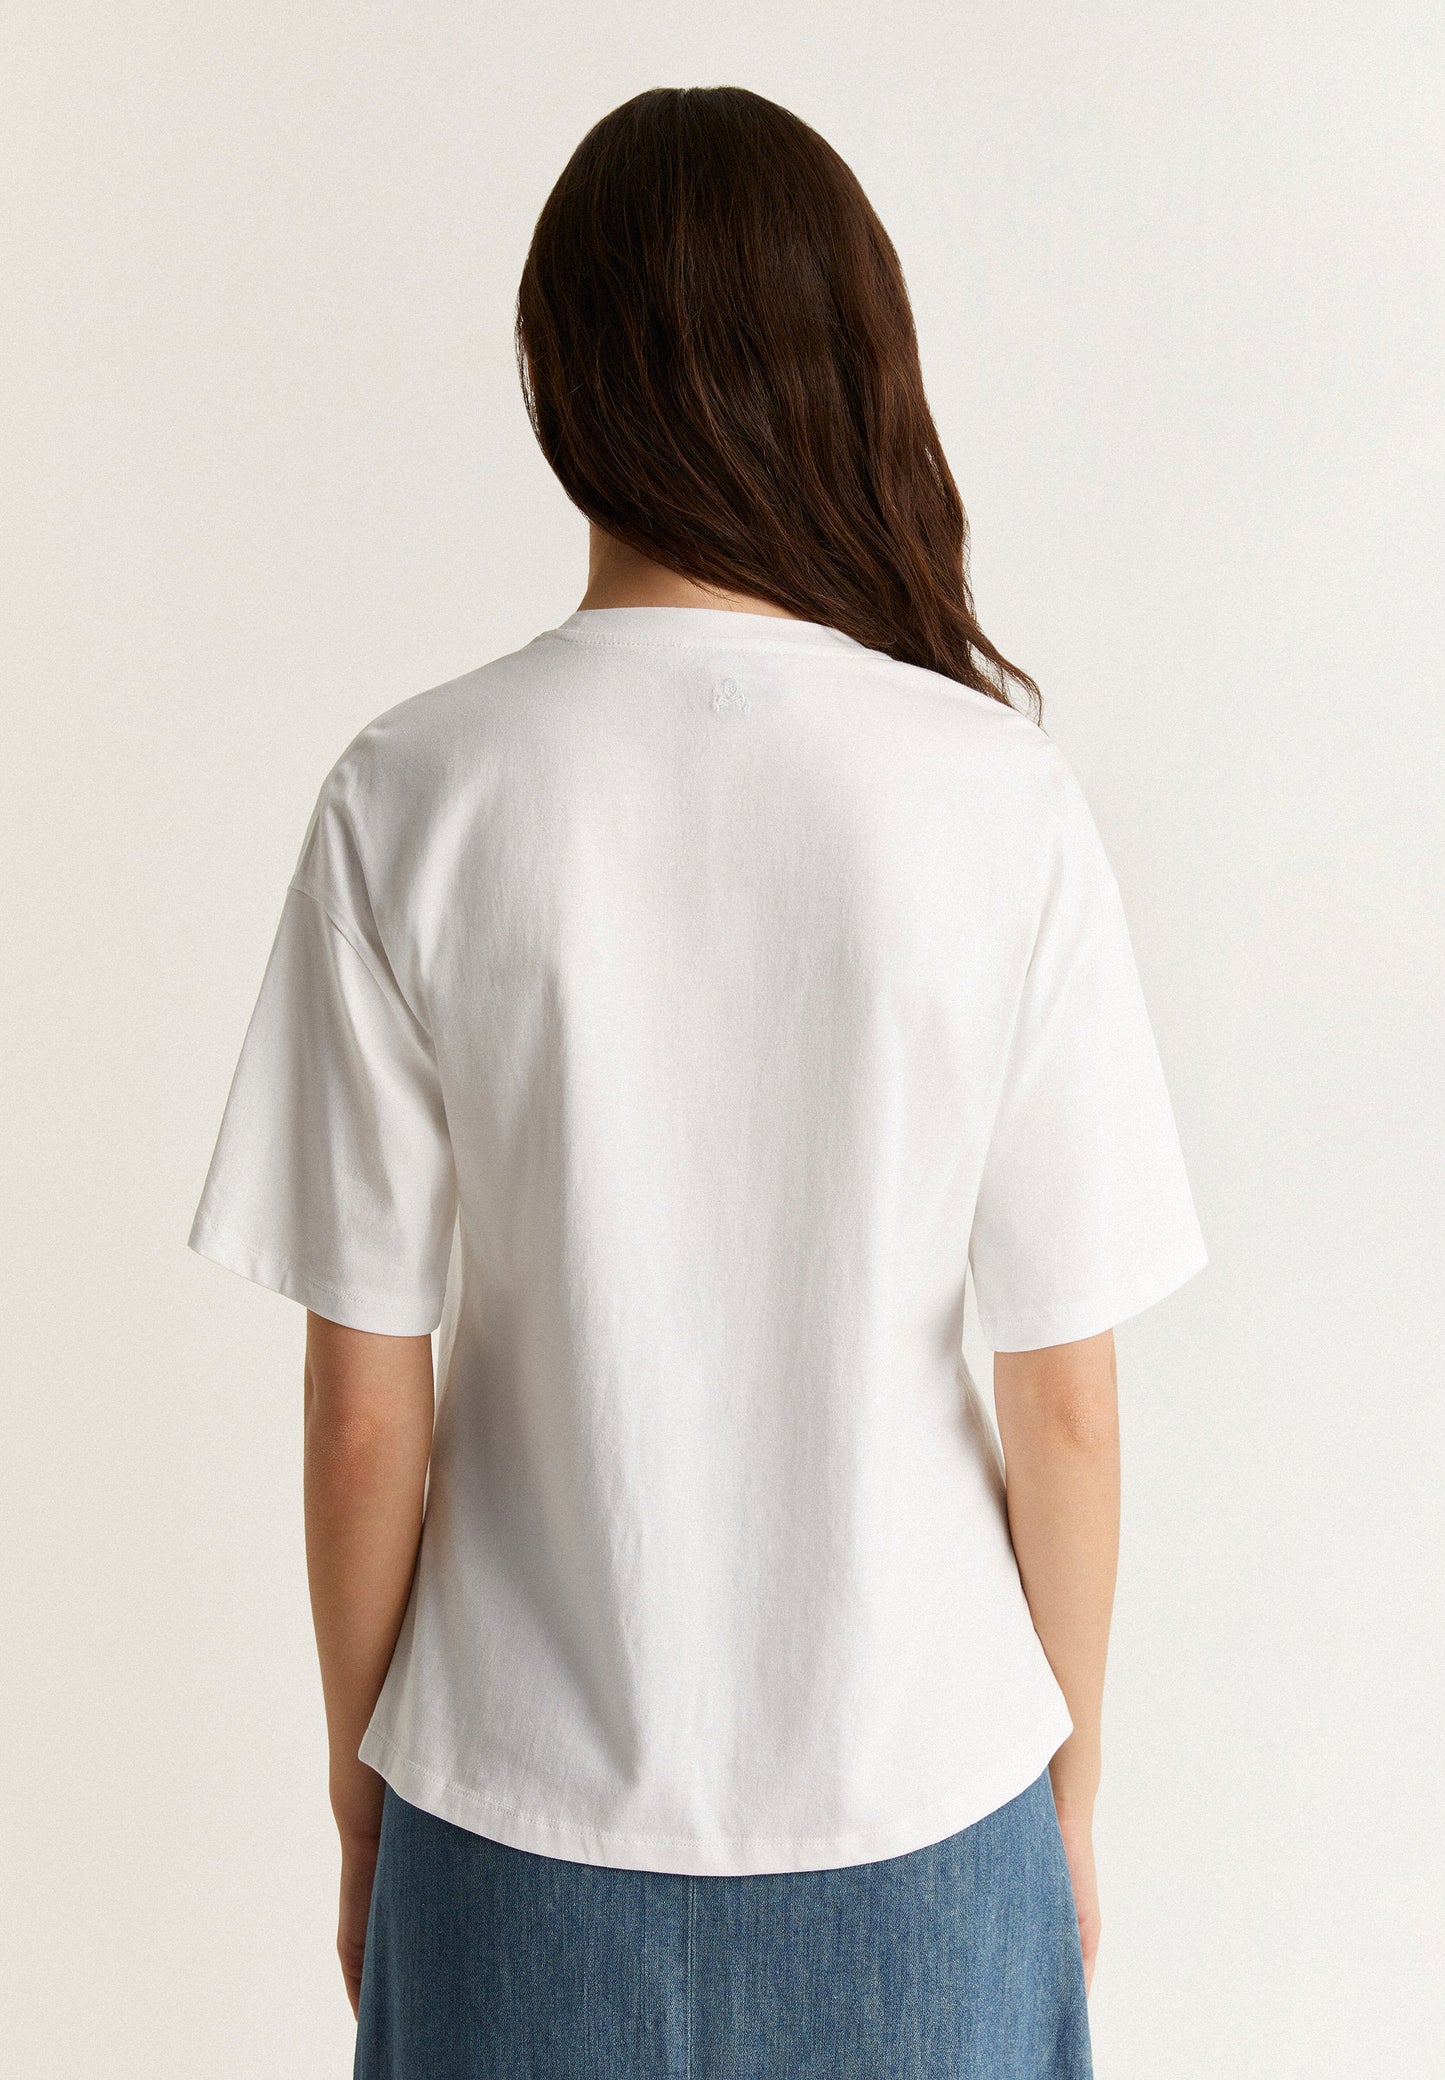 T-SHIRT WITH FRONT BUTTONHOLE DETAIL